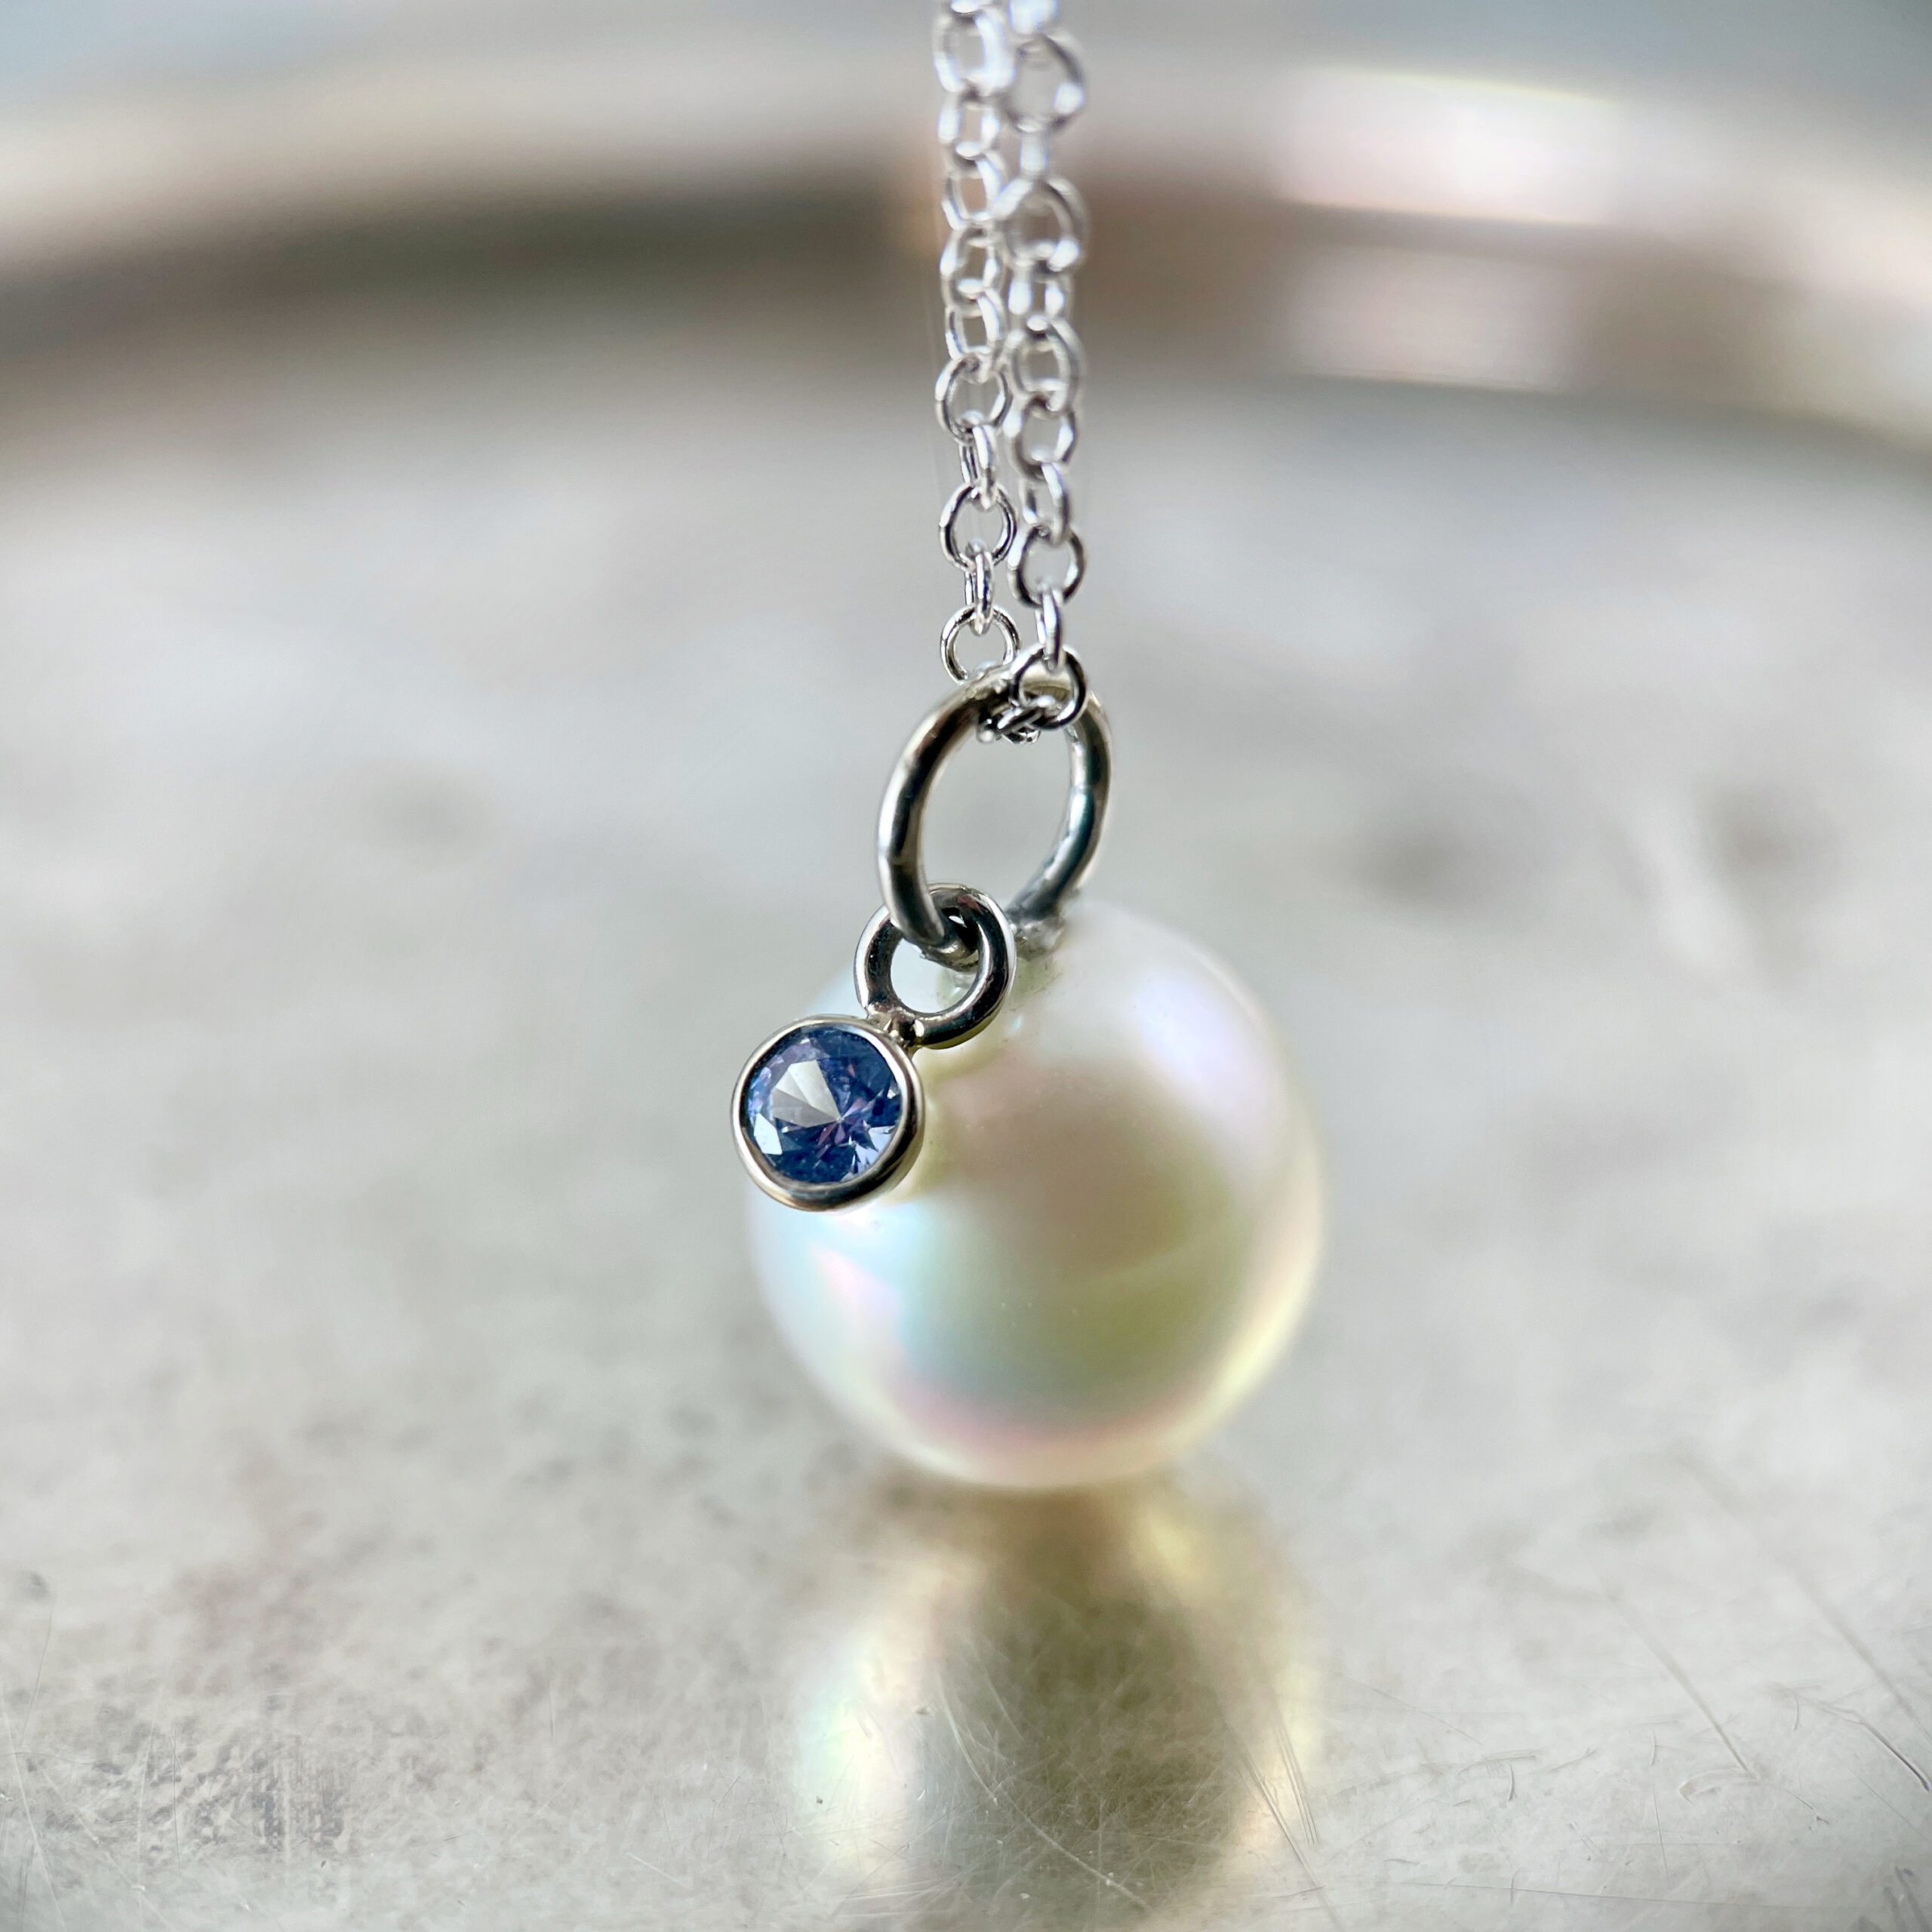 Pearl Cage Pendant Necklace - SOLD - Sholdt Jewelry Design